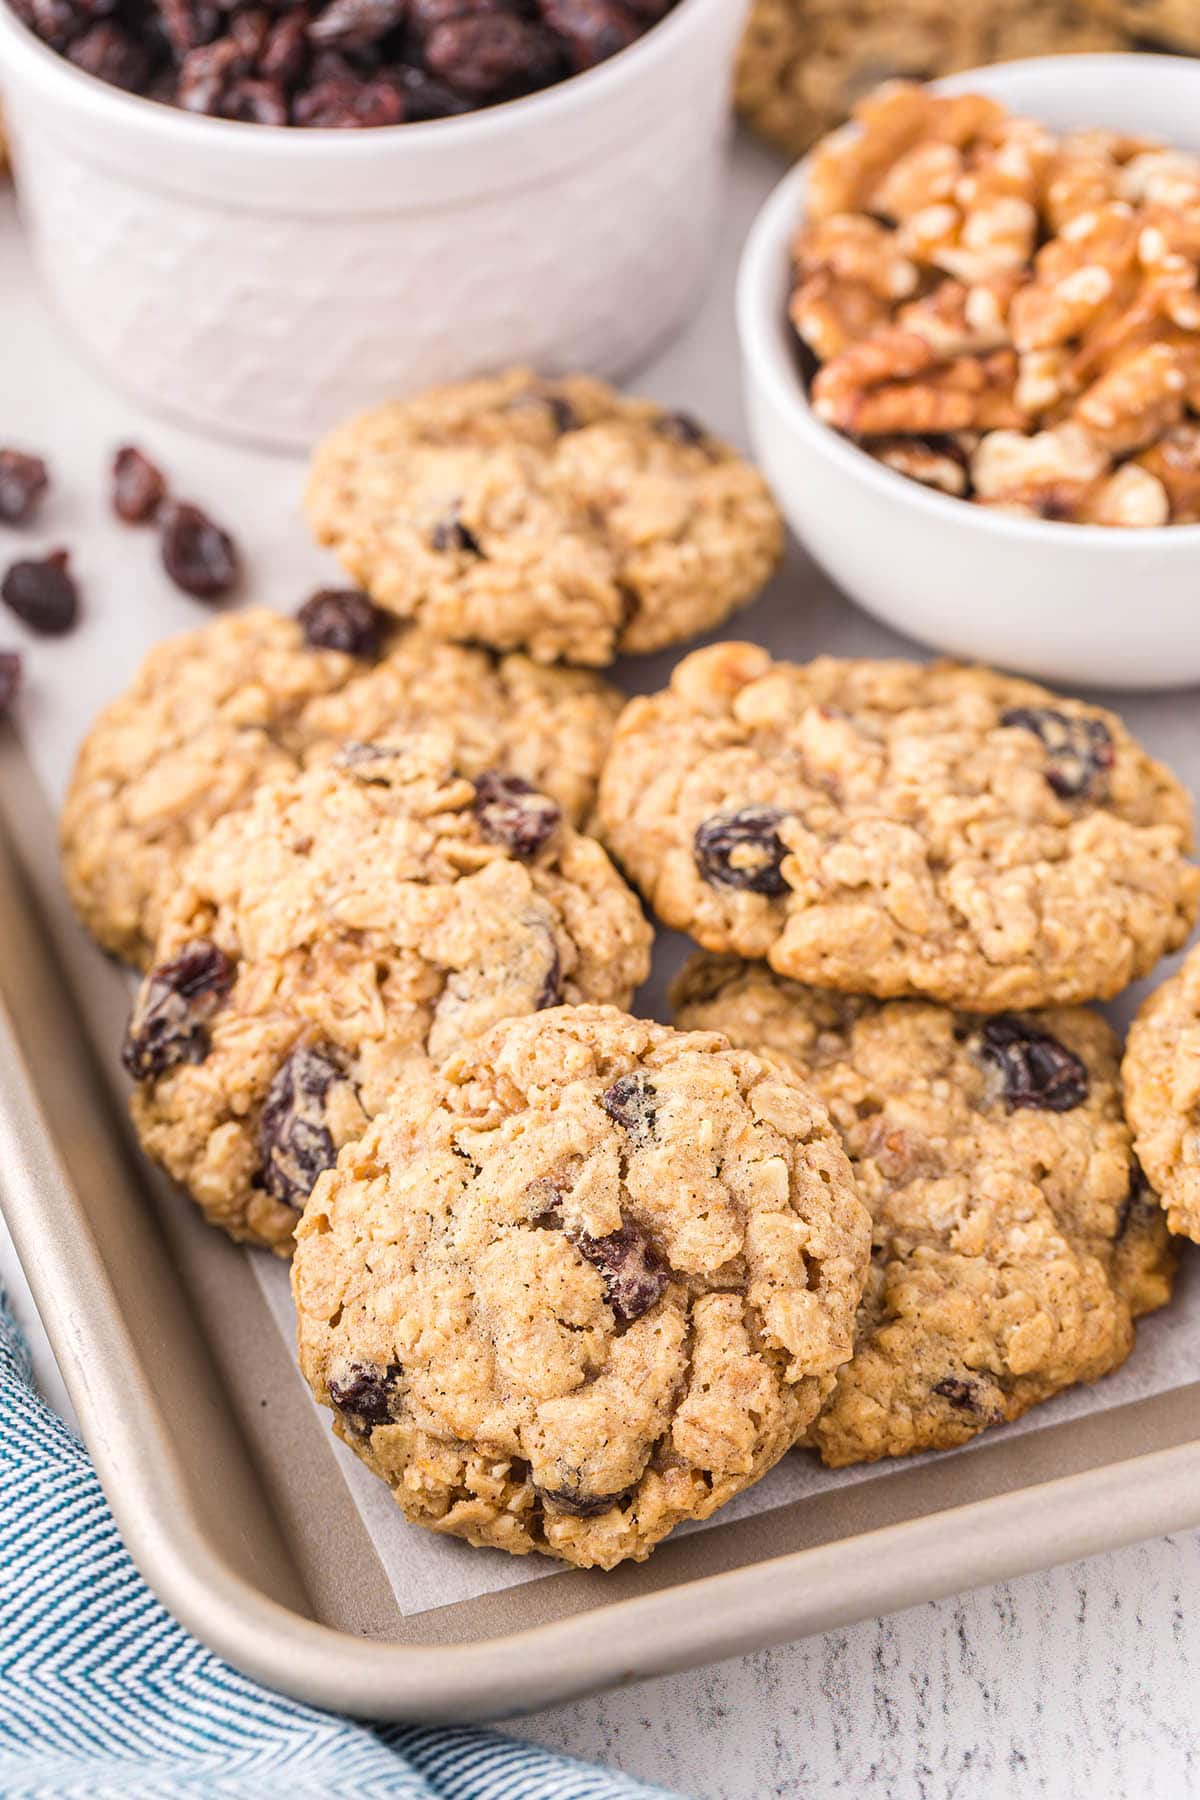 A box filled with different types of food on a plate, with Cookie and Oatmeal